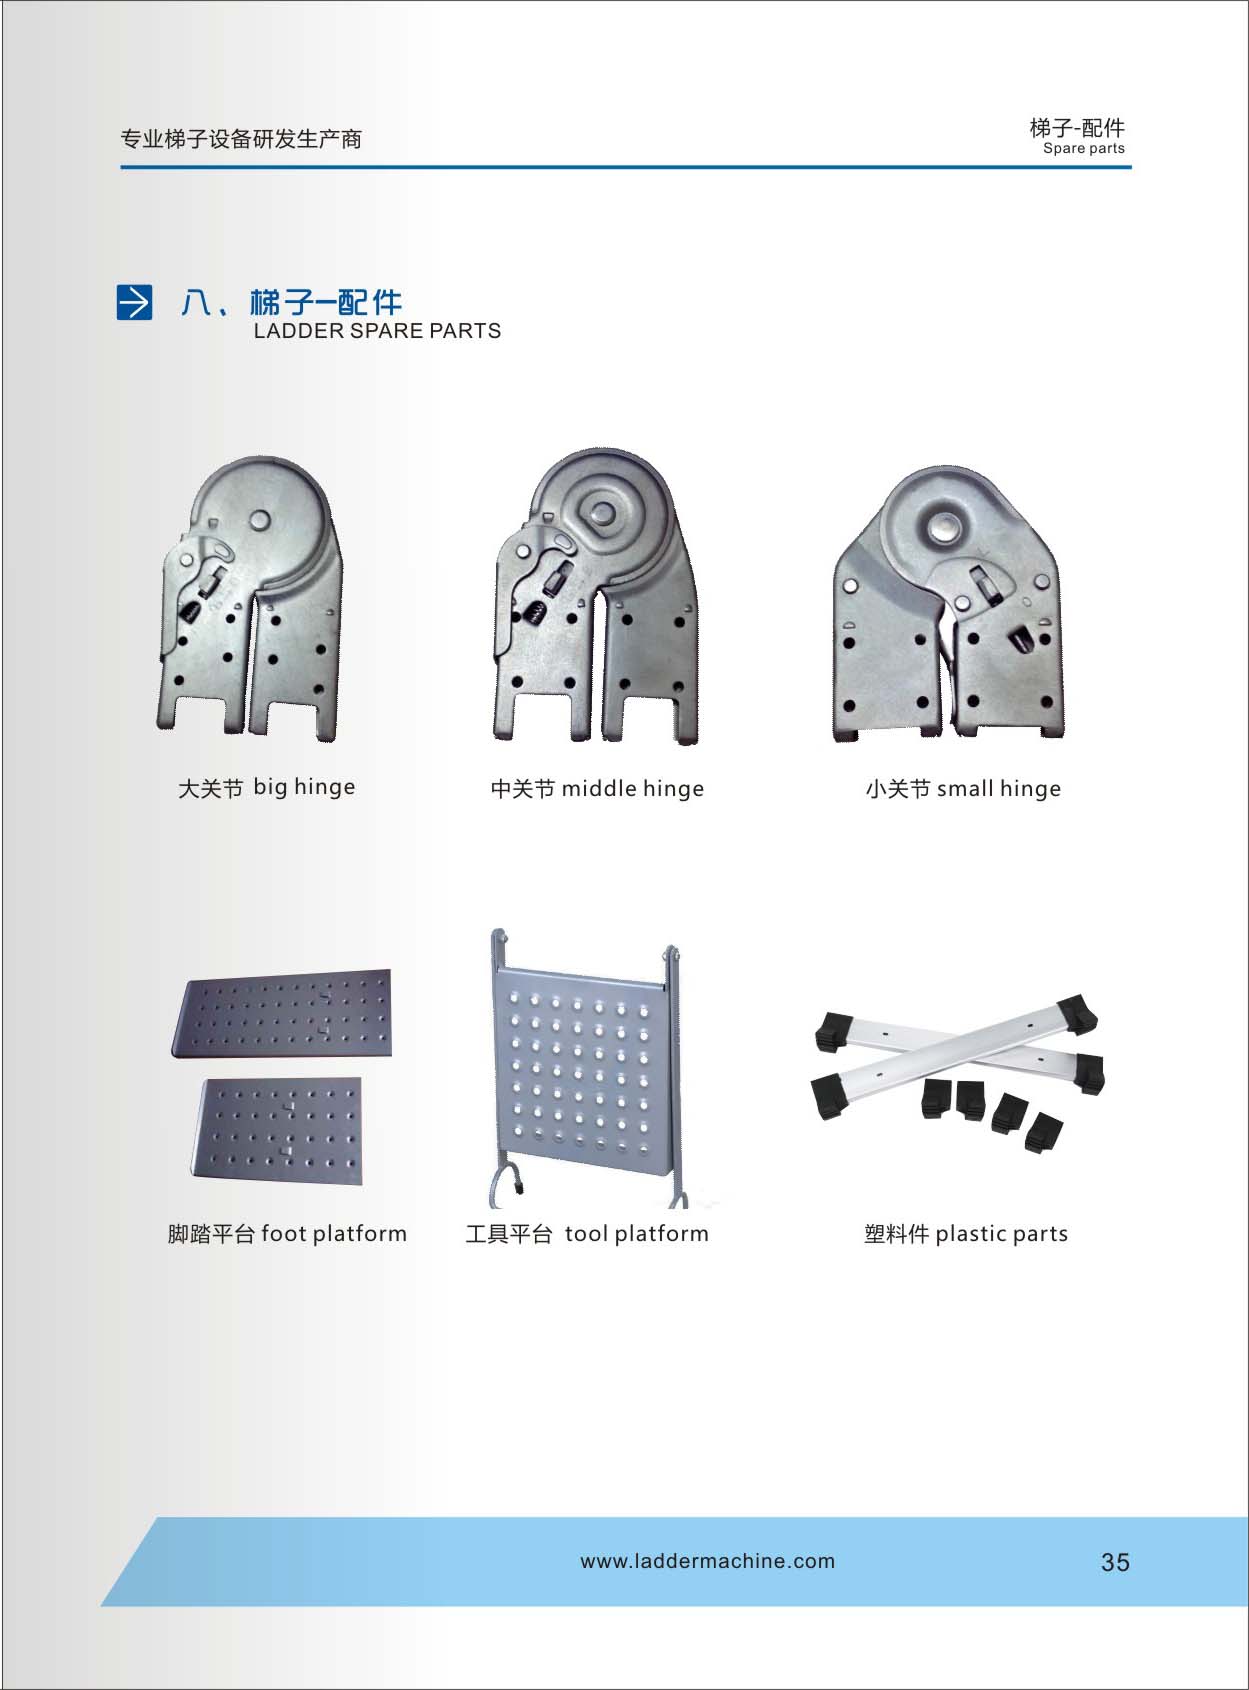 Ladder Spare Parts-Hinges for the Multi purpose ladder